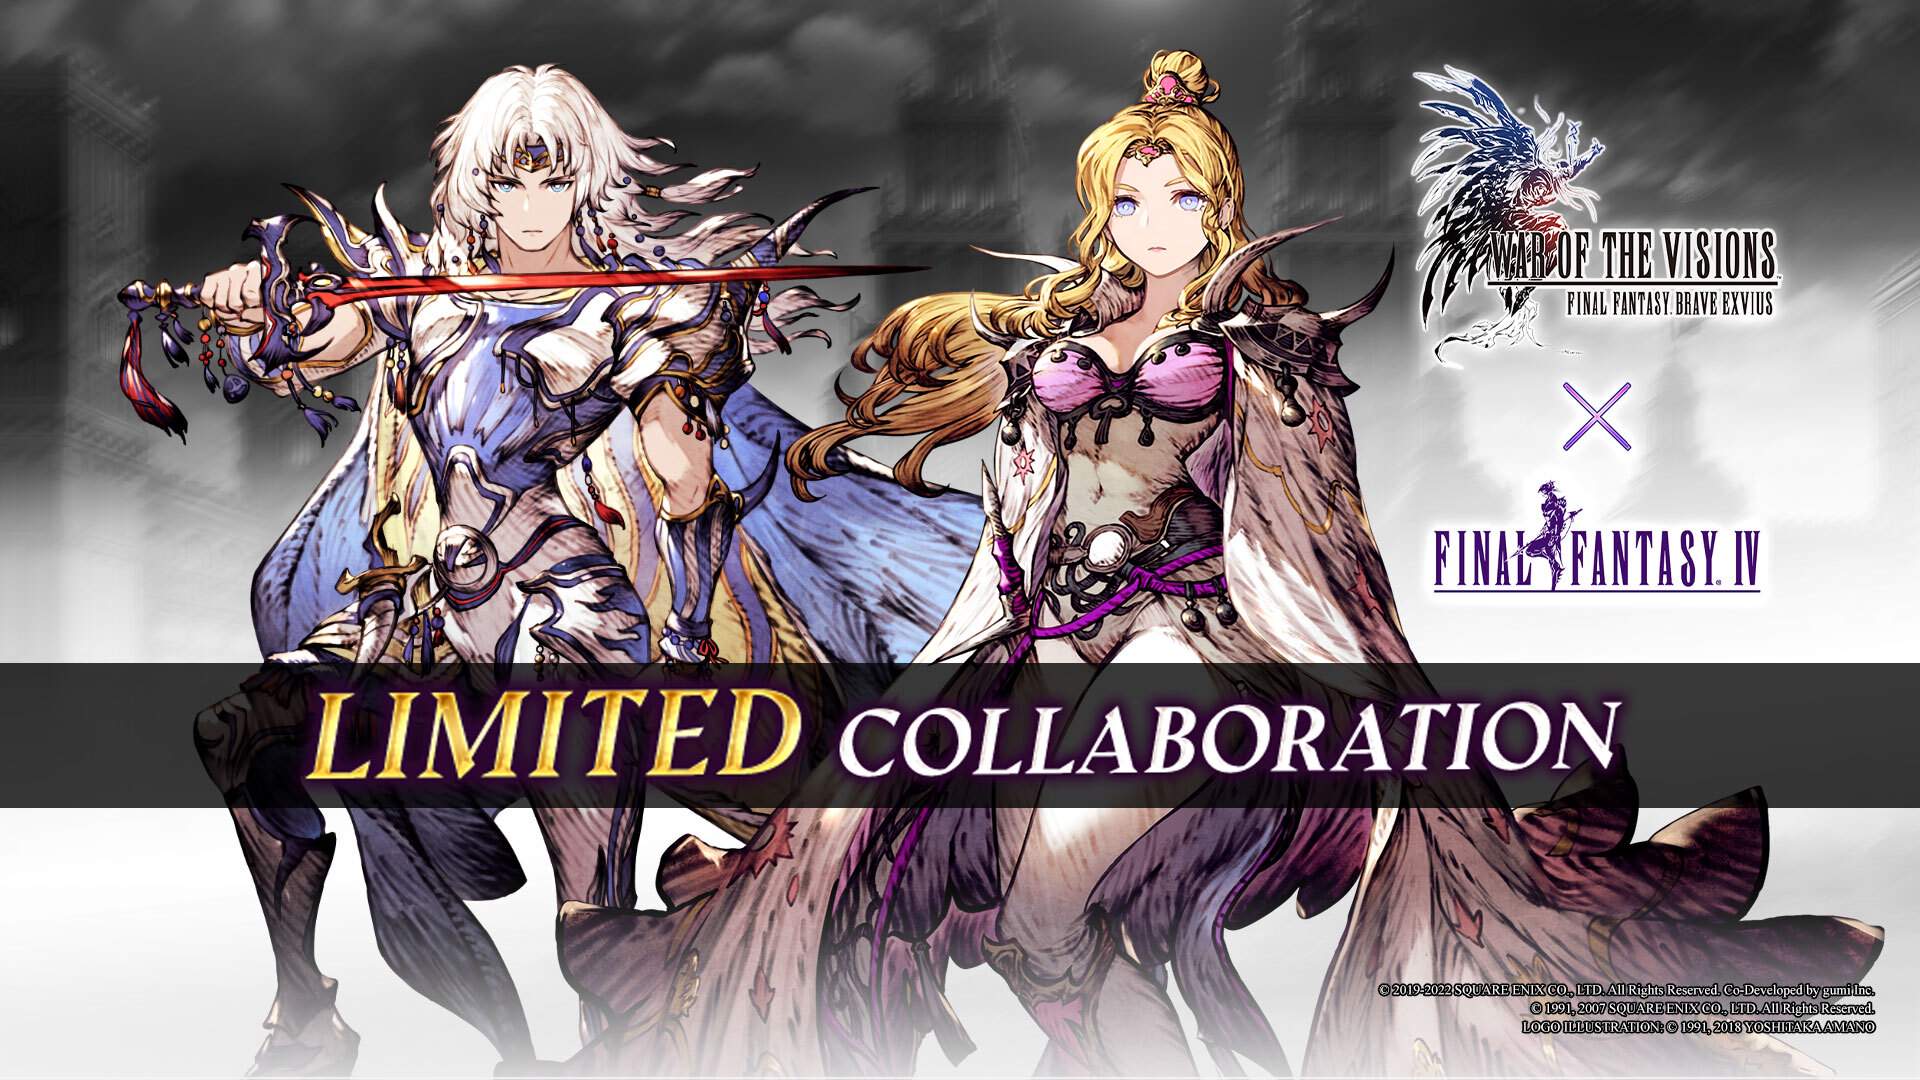 FINAL FANTASY 4 characters Cecil and Rosa lined up for the limited collaboration.